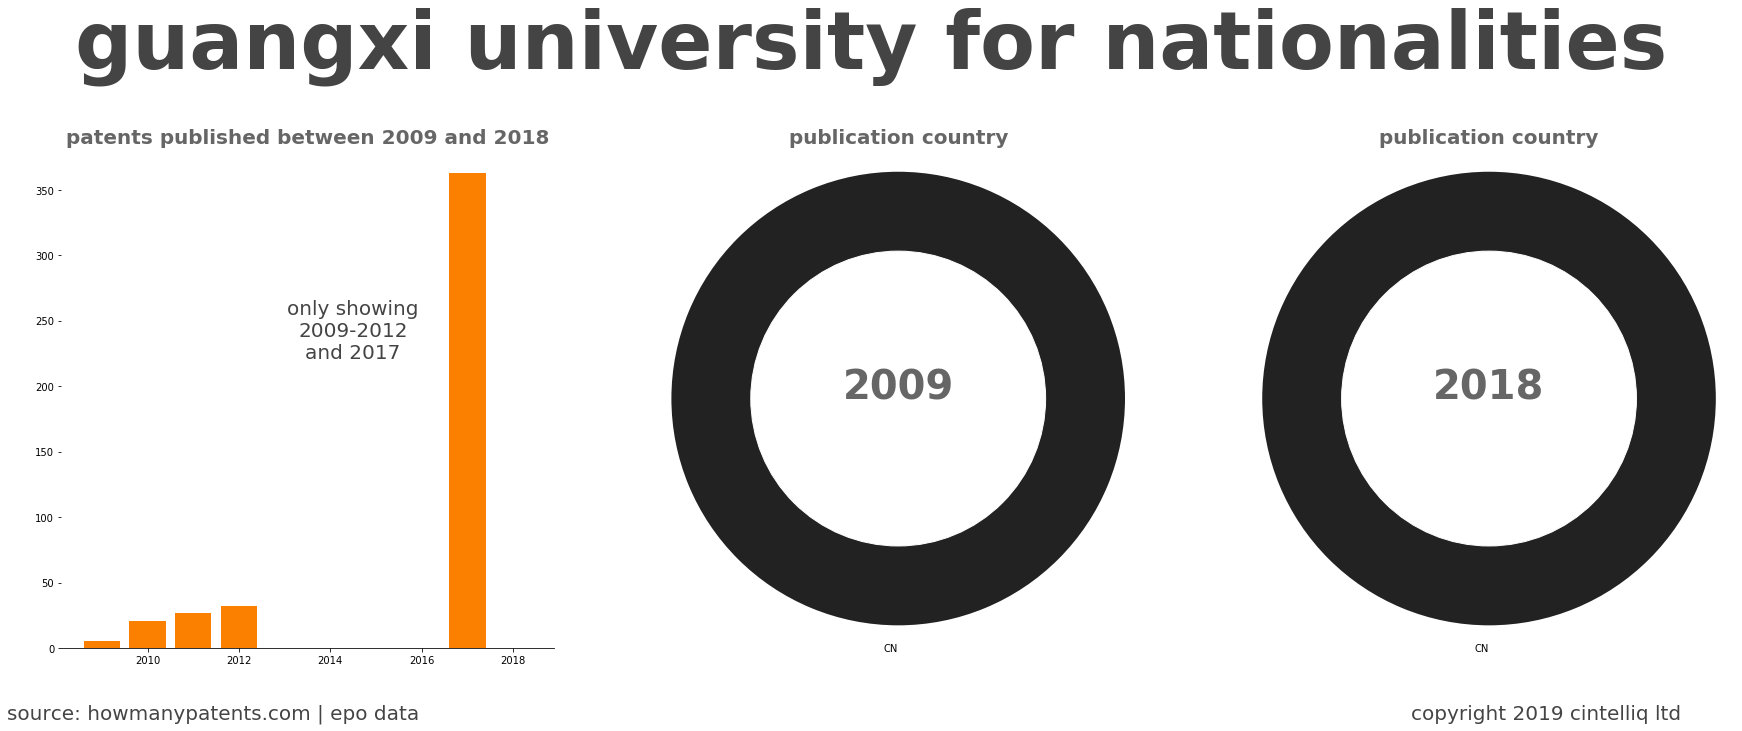 summary of patents for Guangxi University For Nationalities